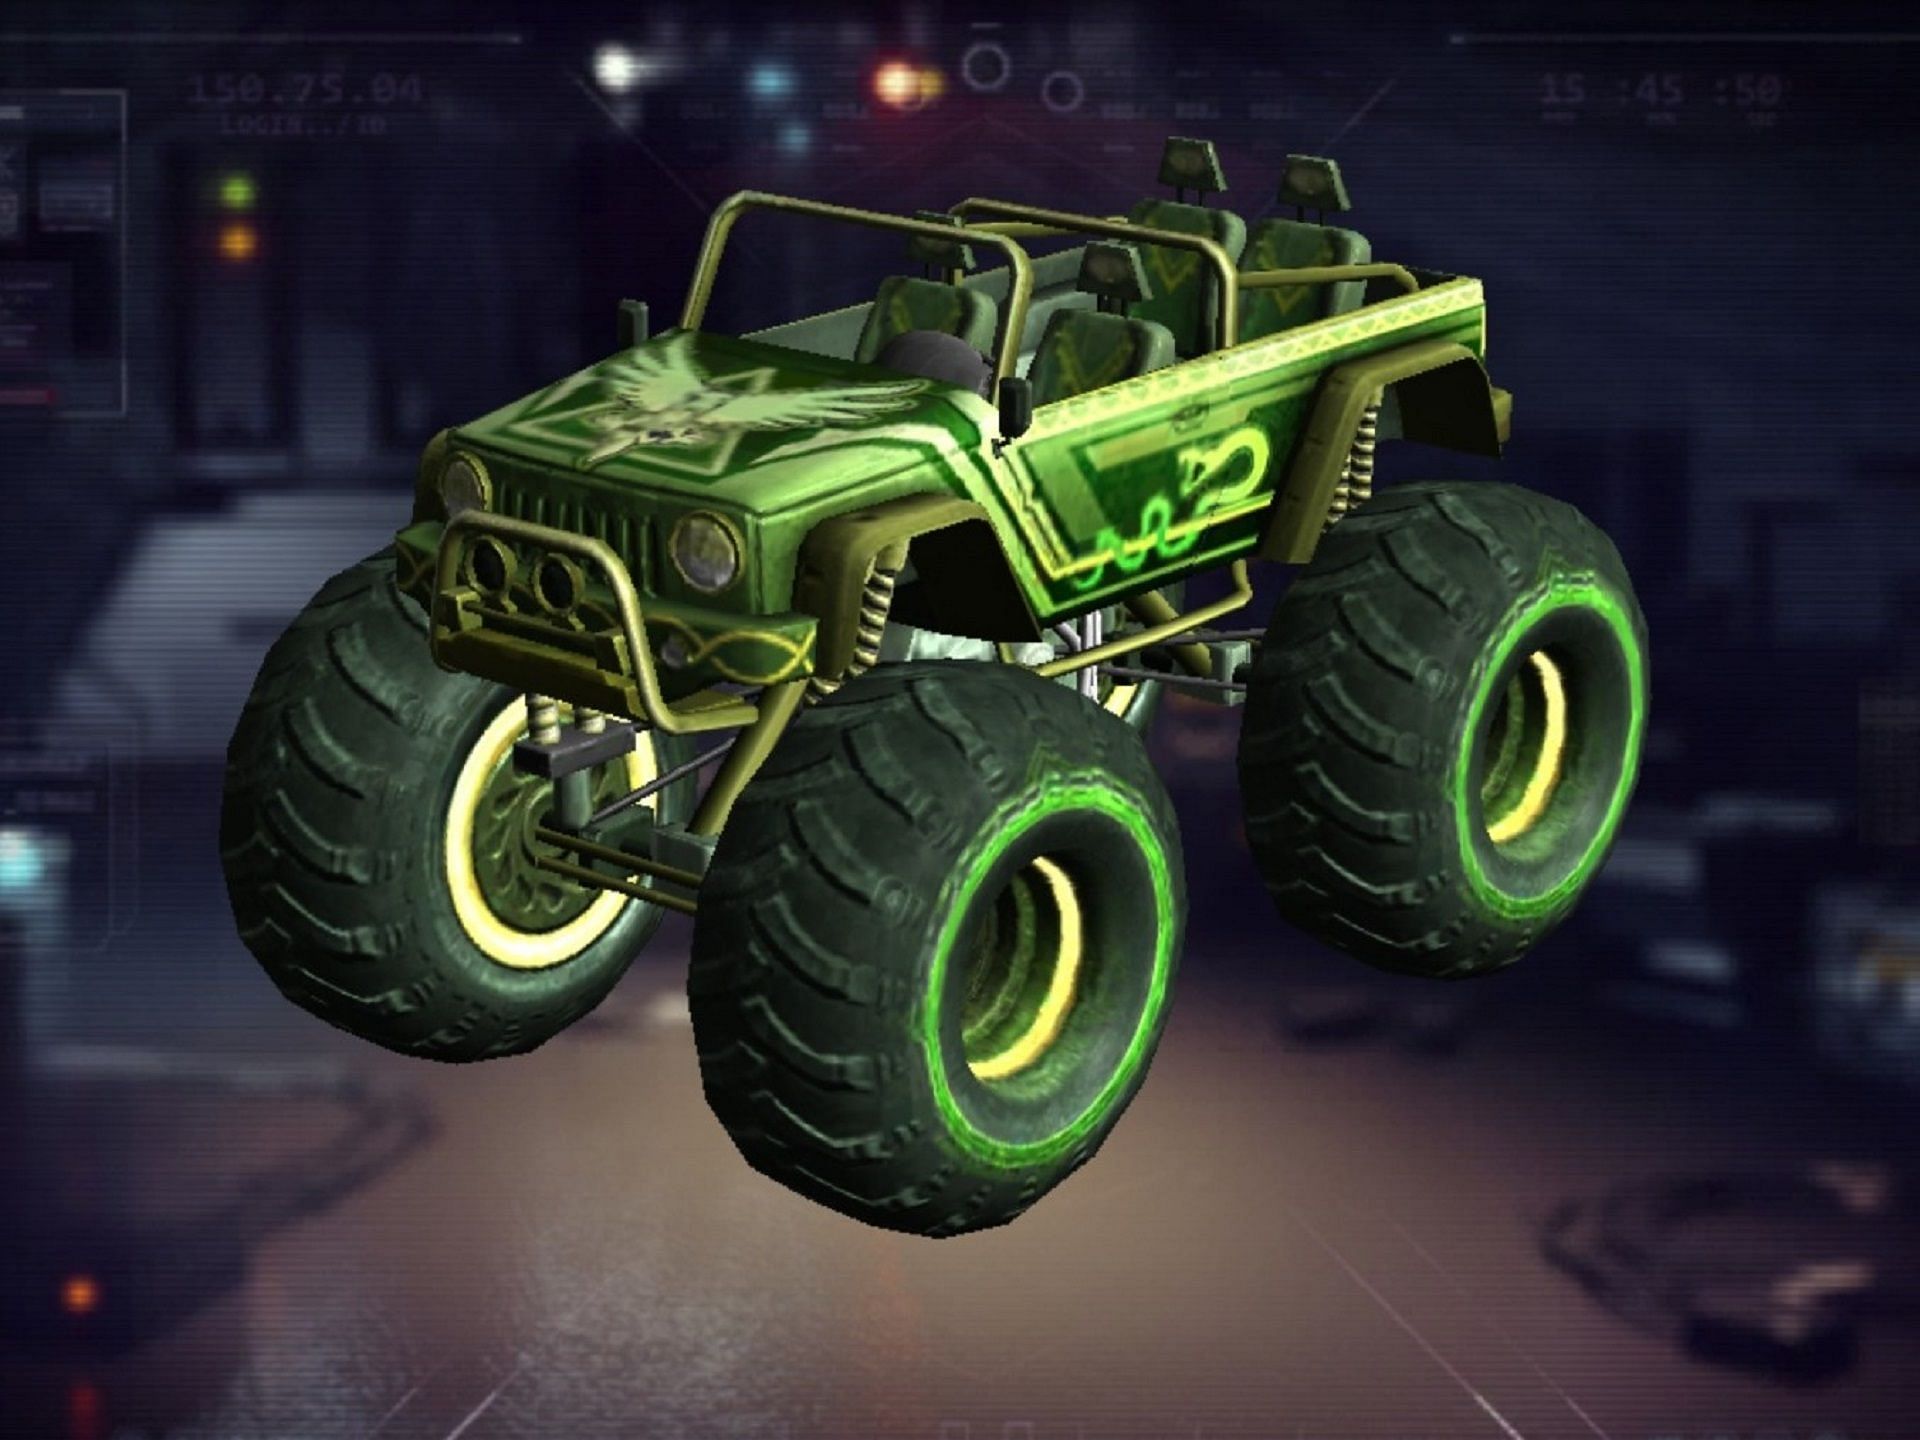 The Monster Truck skin is the main reward of the Booyah Challenge event (Image via Garena)